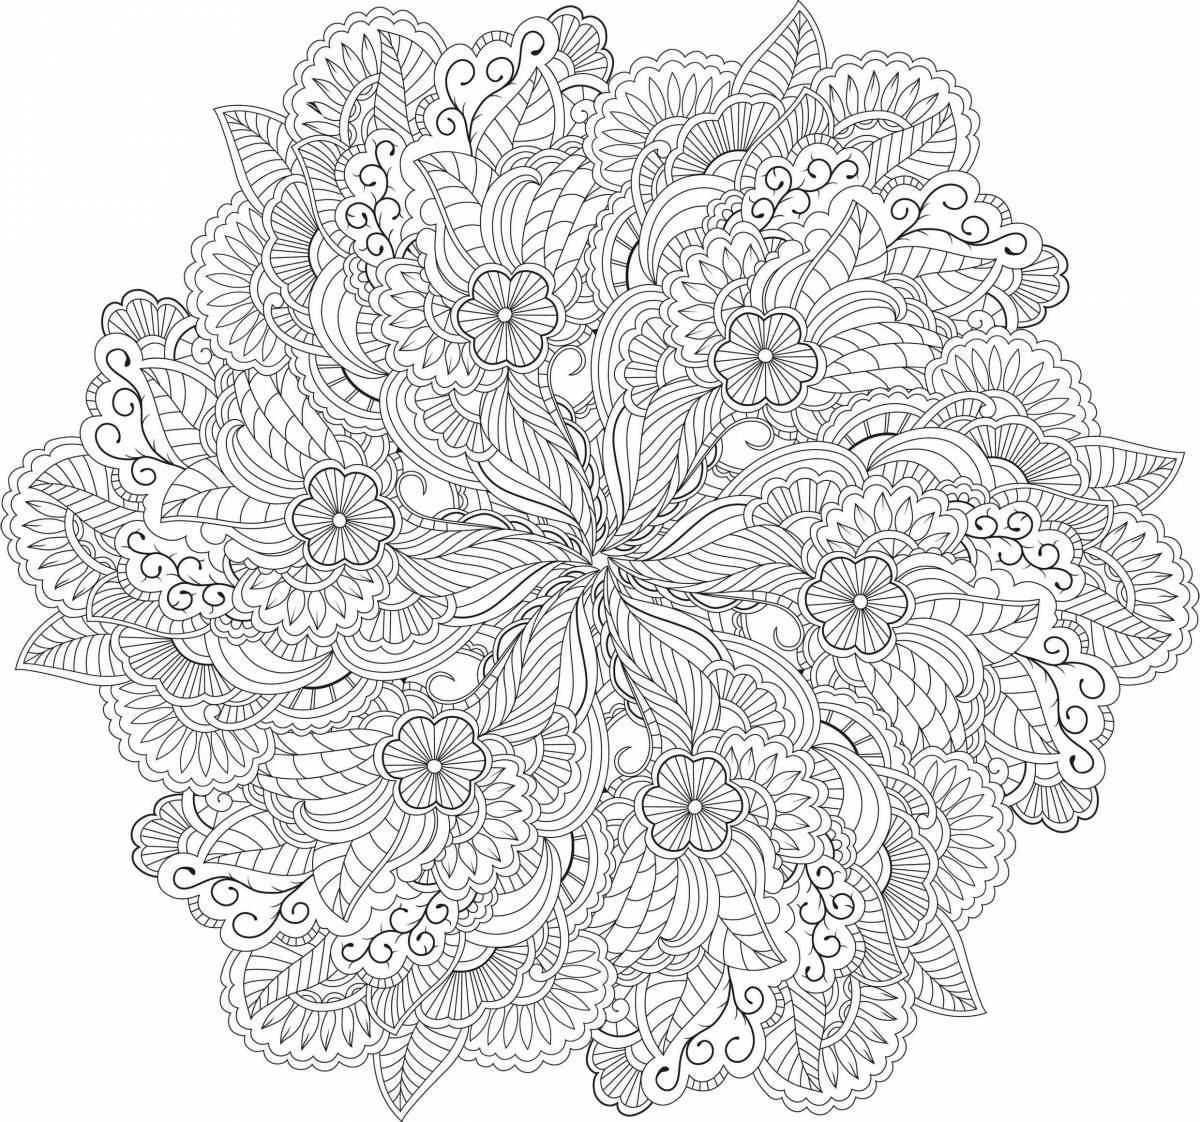 Dazzling mandala coloring book for adults